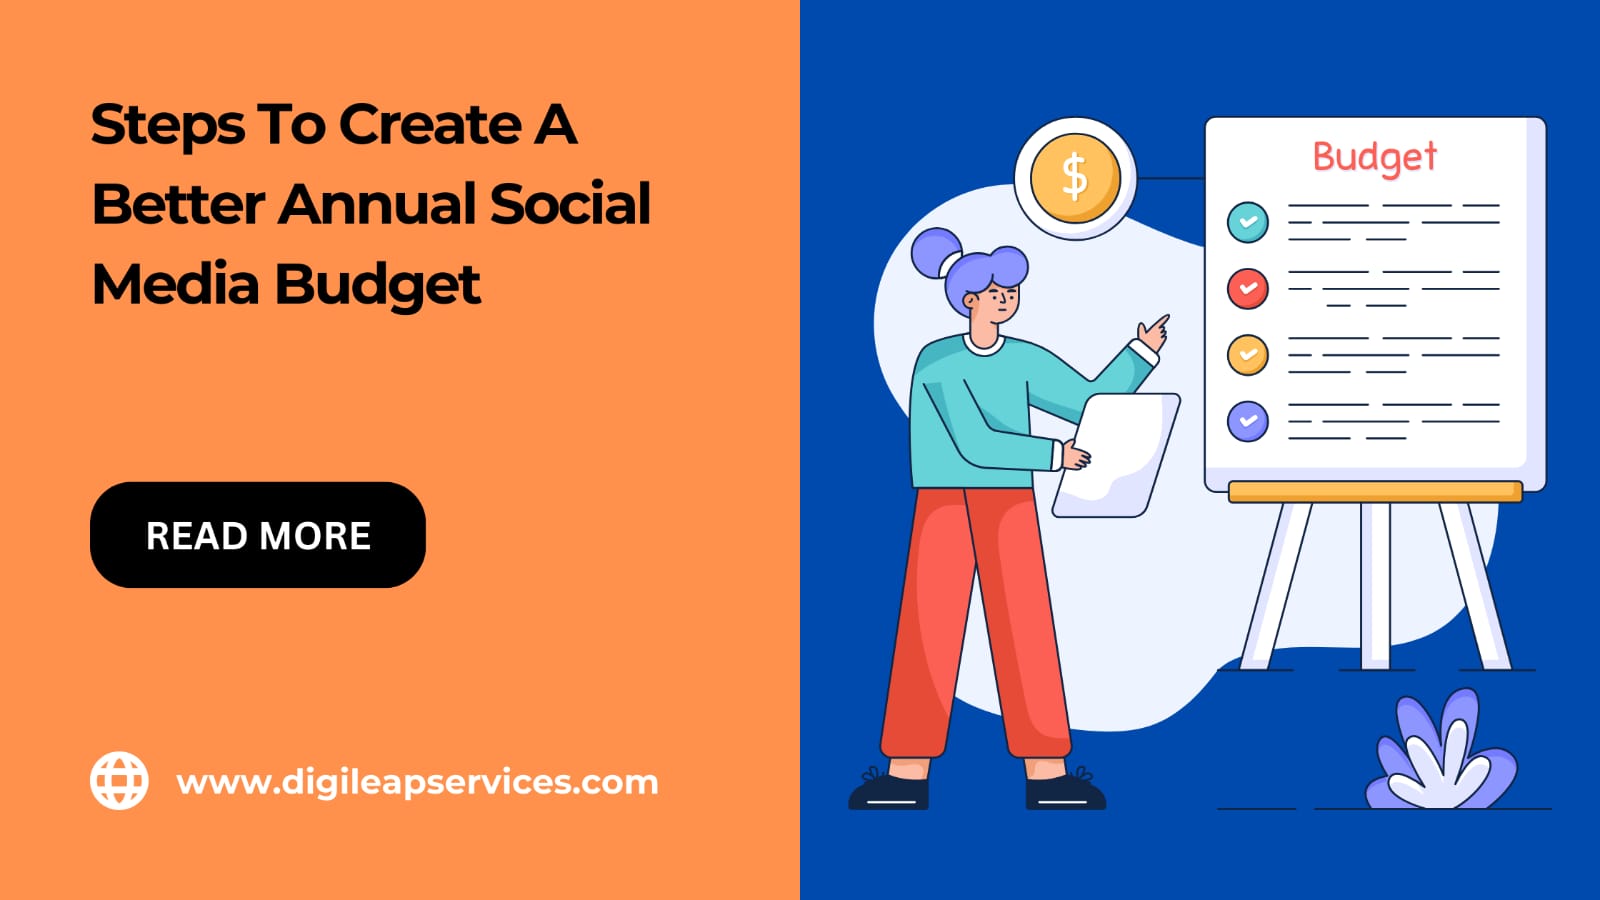 Steps to Create a Better Annual Social Media Budget